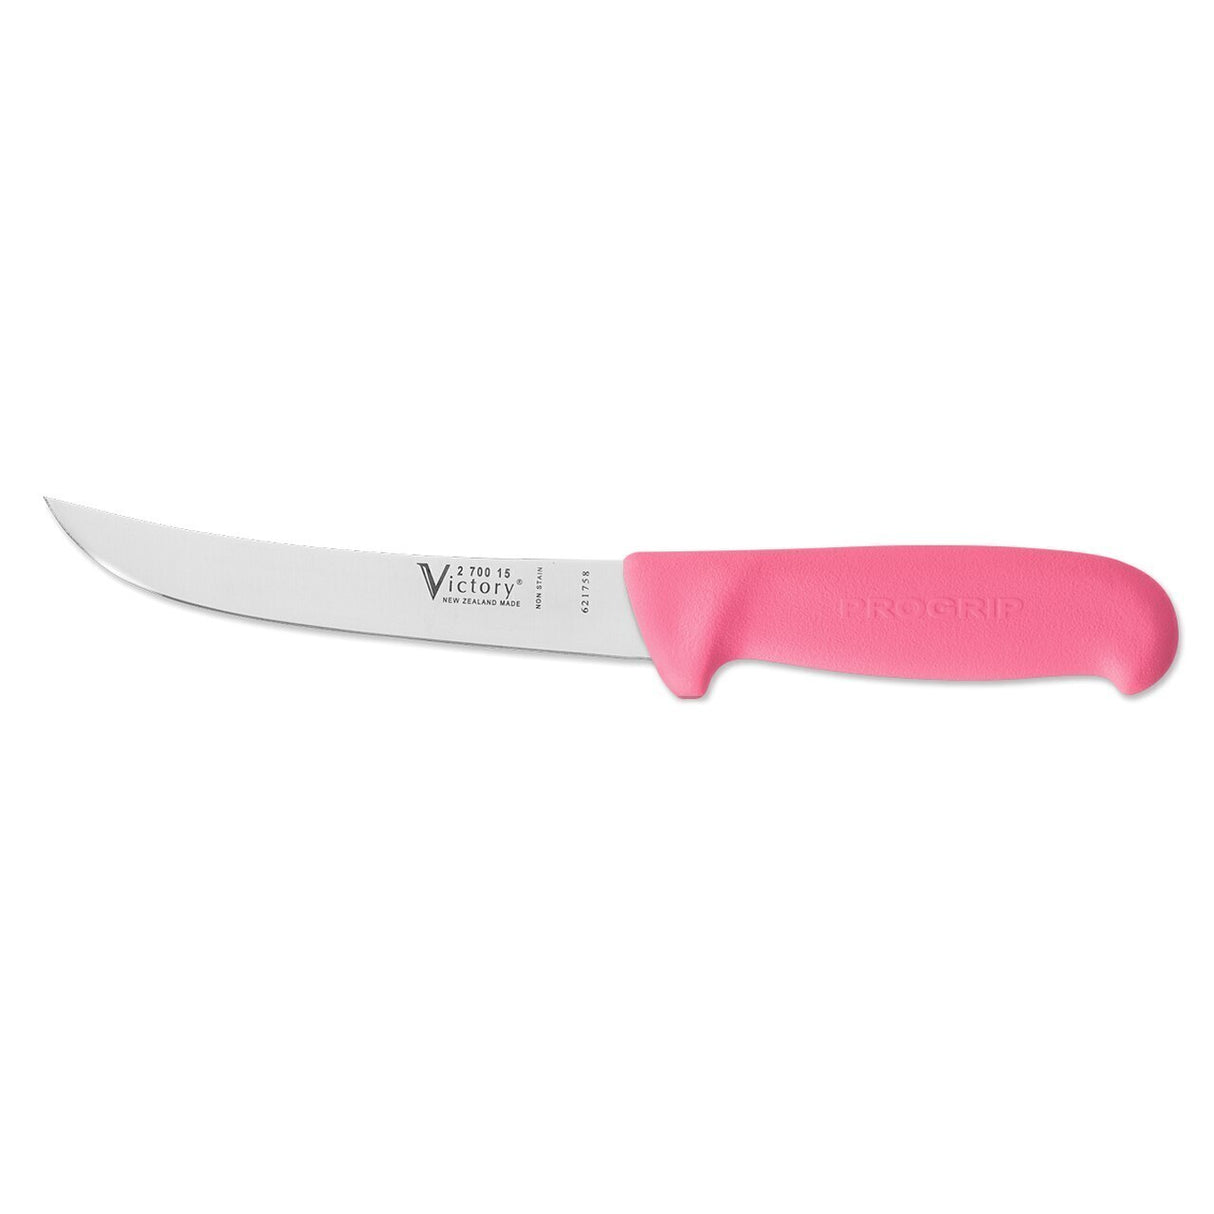 Victory Curved Pink Boning Knife 15cm 2 700 15 hang sell